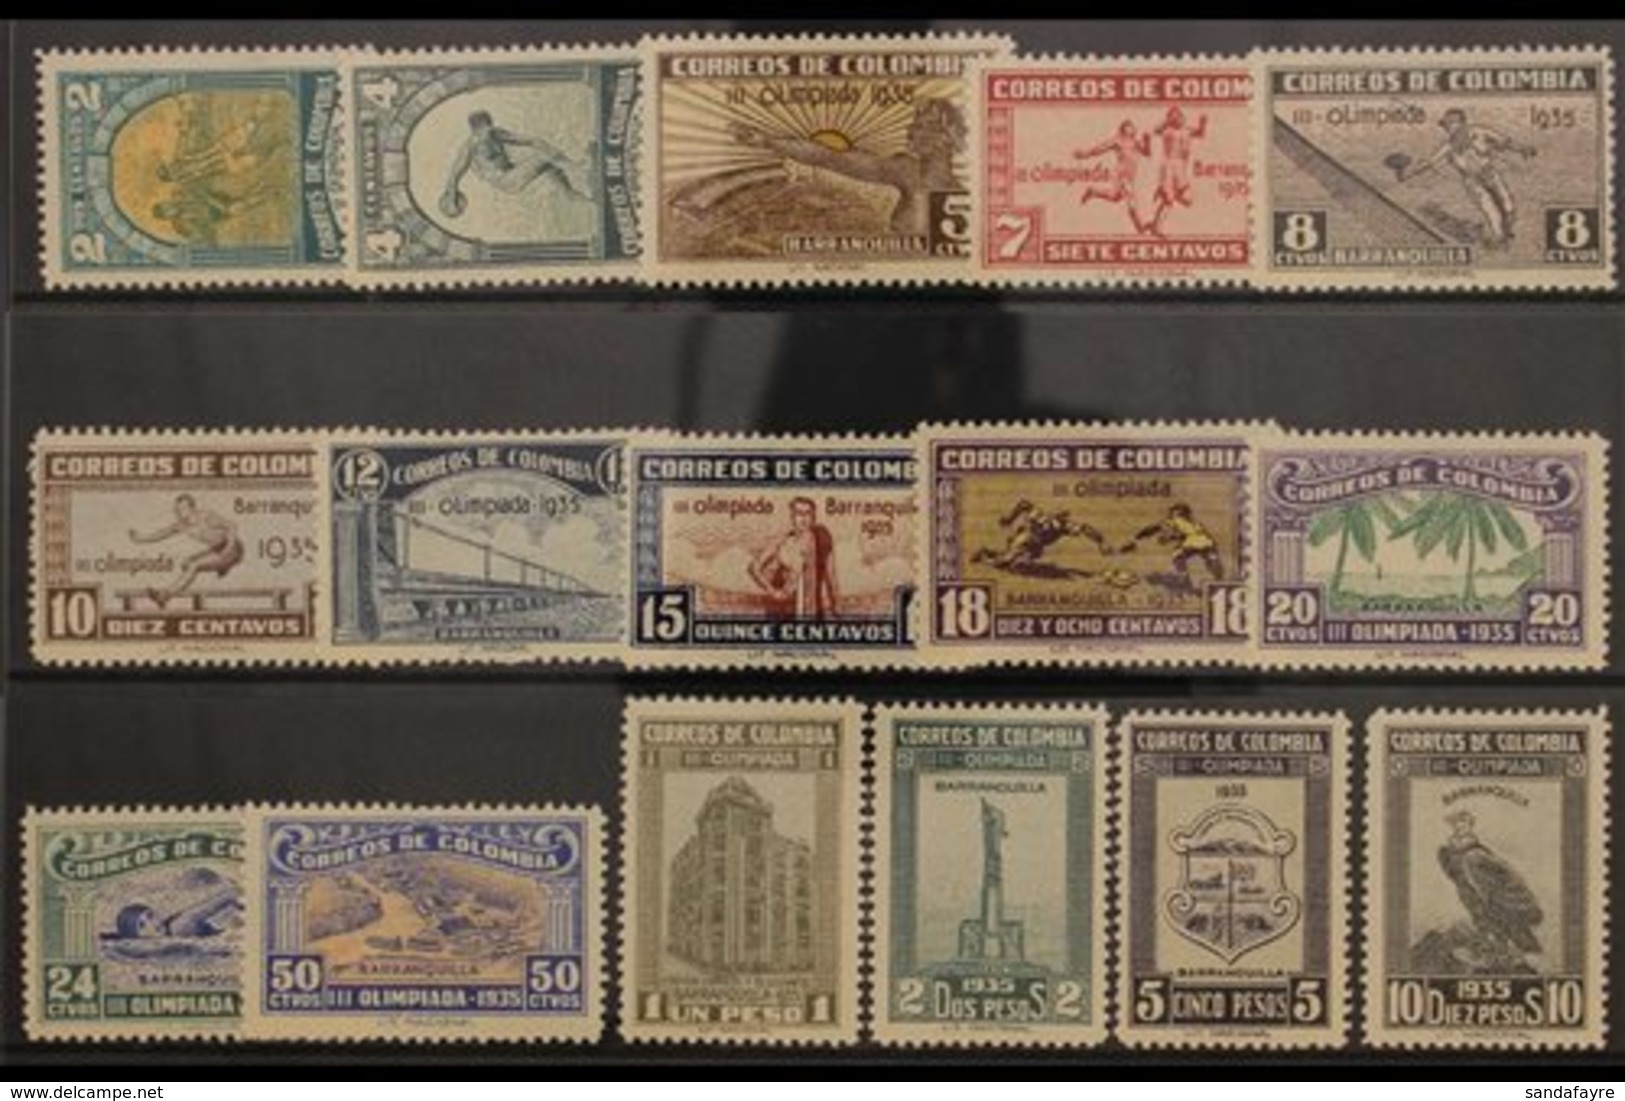 1935 OLYMPIC GAMES SET  Third National Olympiad / Sports Set Complete, SG 461/476 (Scott 421/36), A Seldom Seen Very Fin - Colombia